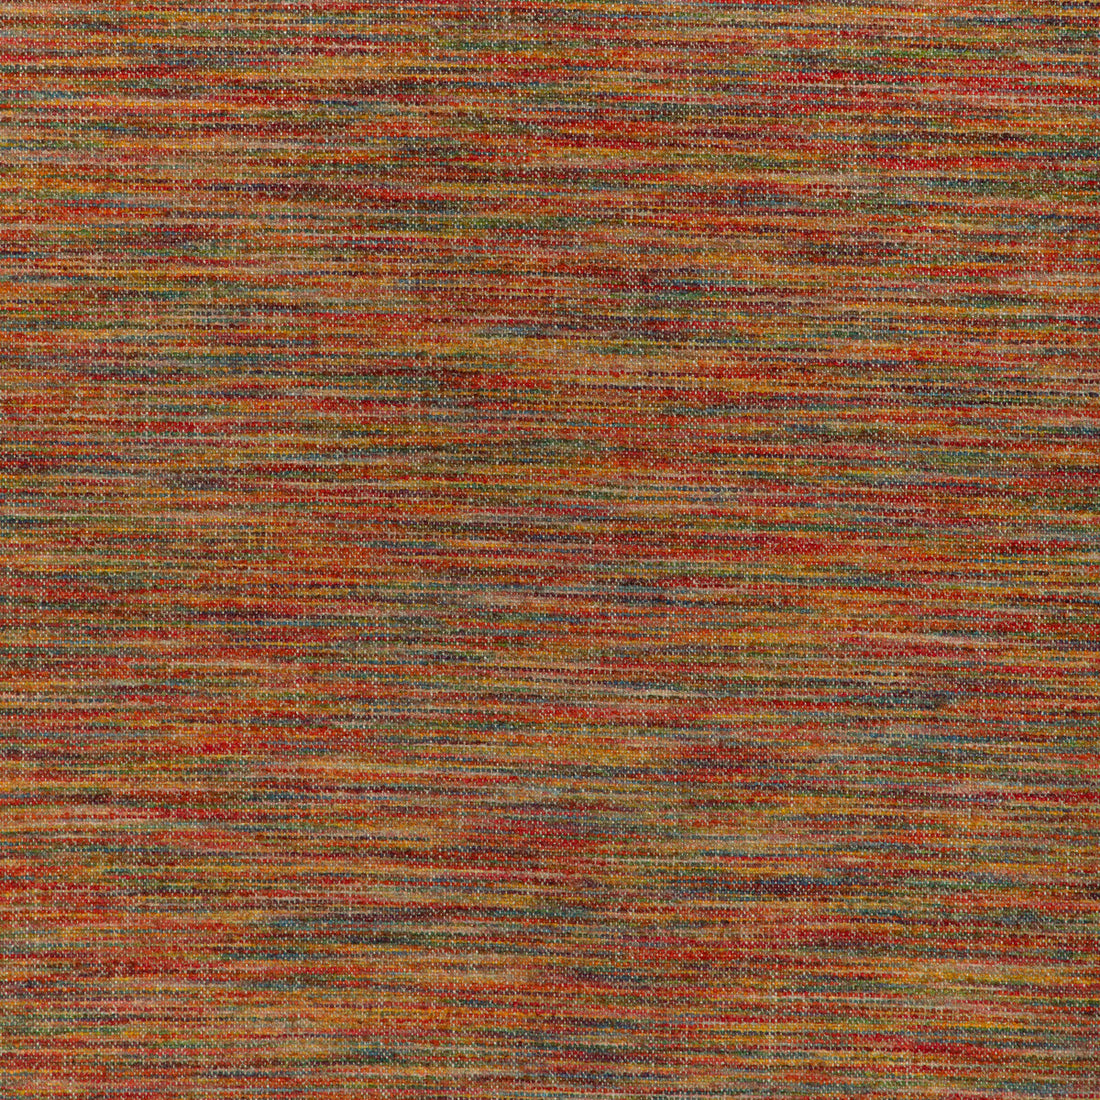 Combes Texture fabric in sunset color - pattern 8023131.424.0 - by Brunschwig &amp; Fils in the Arles Weaves collection